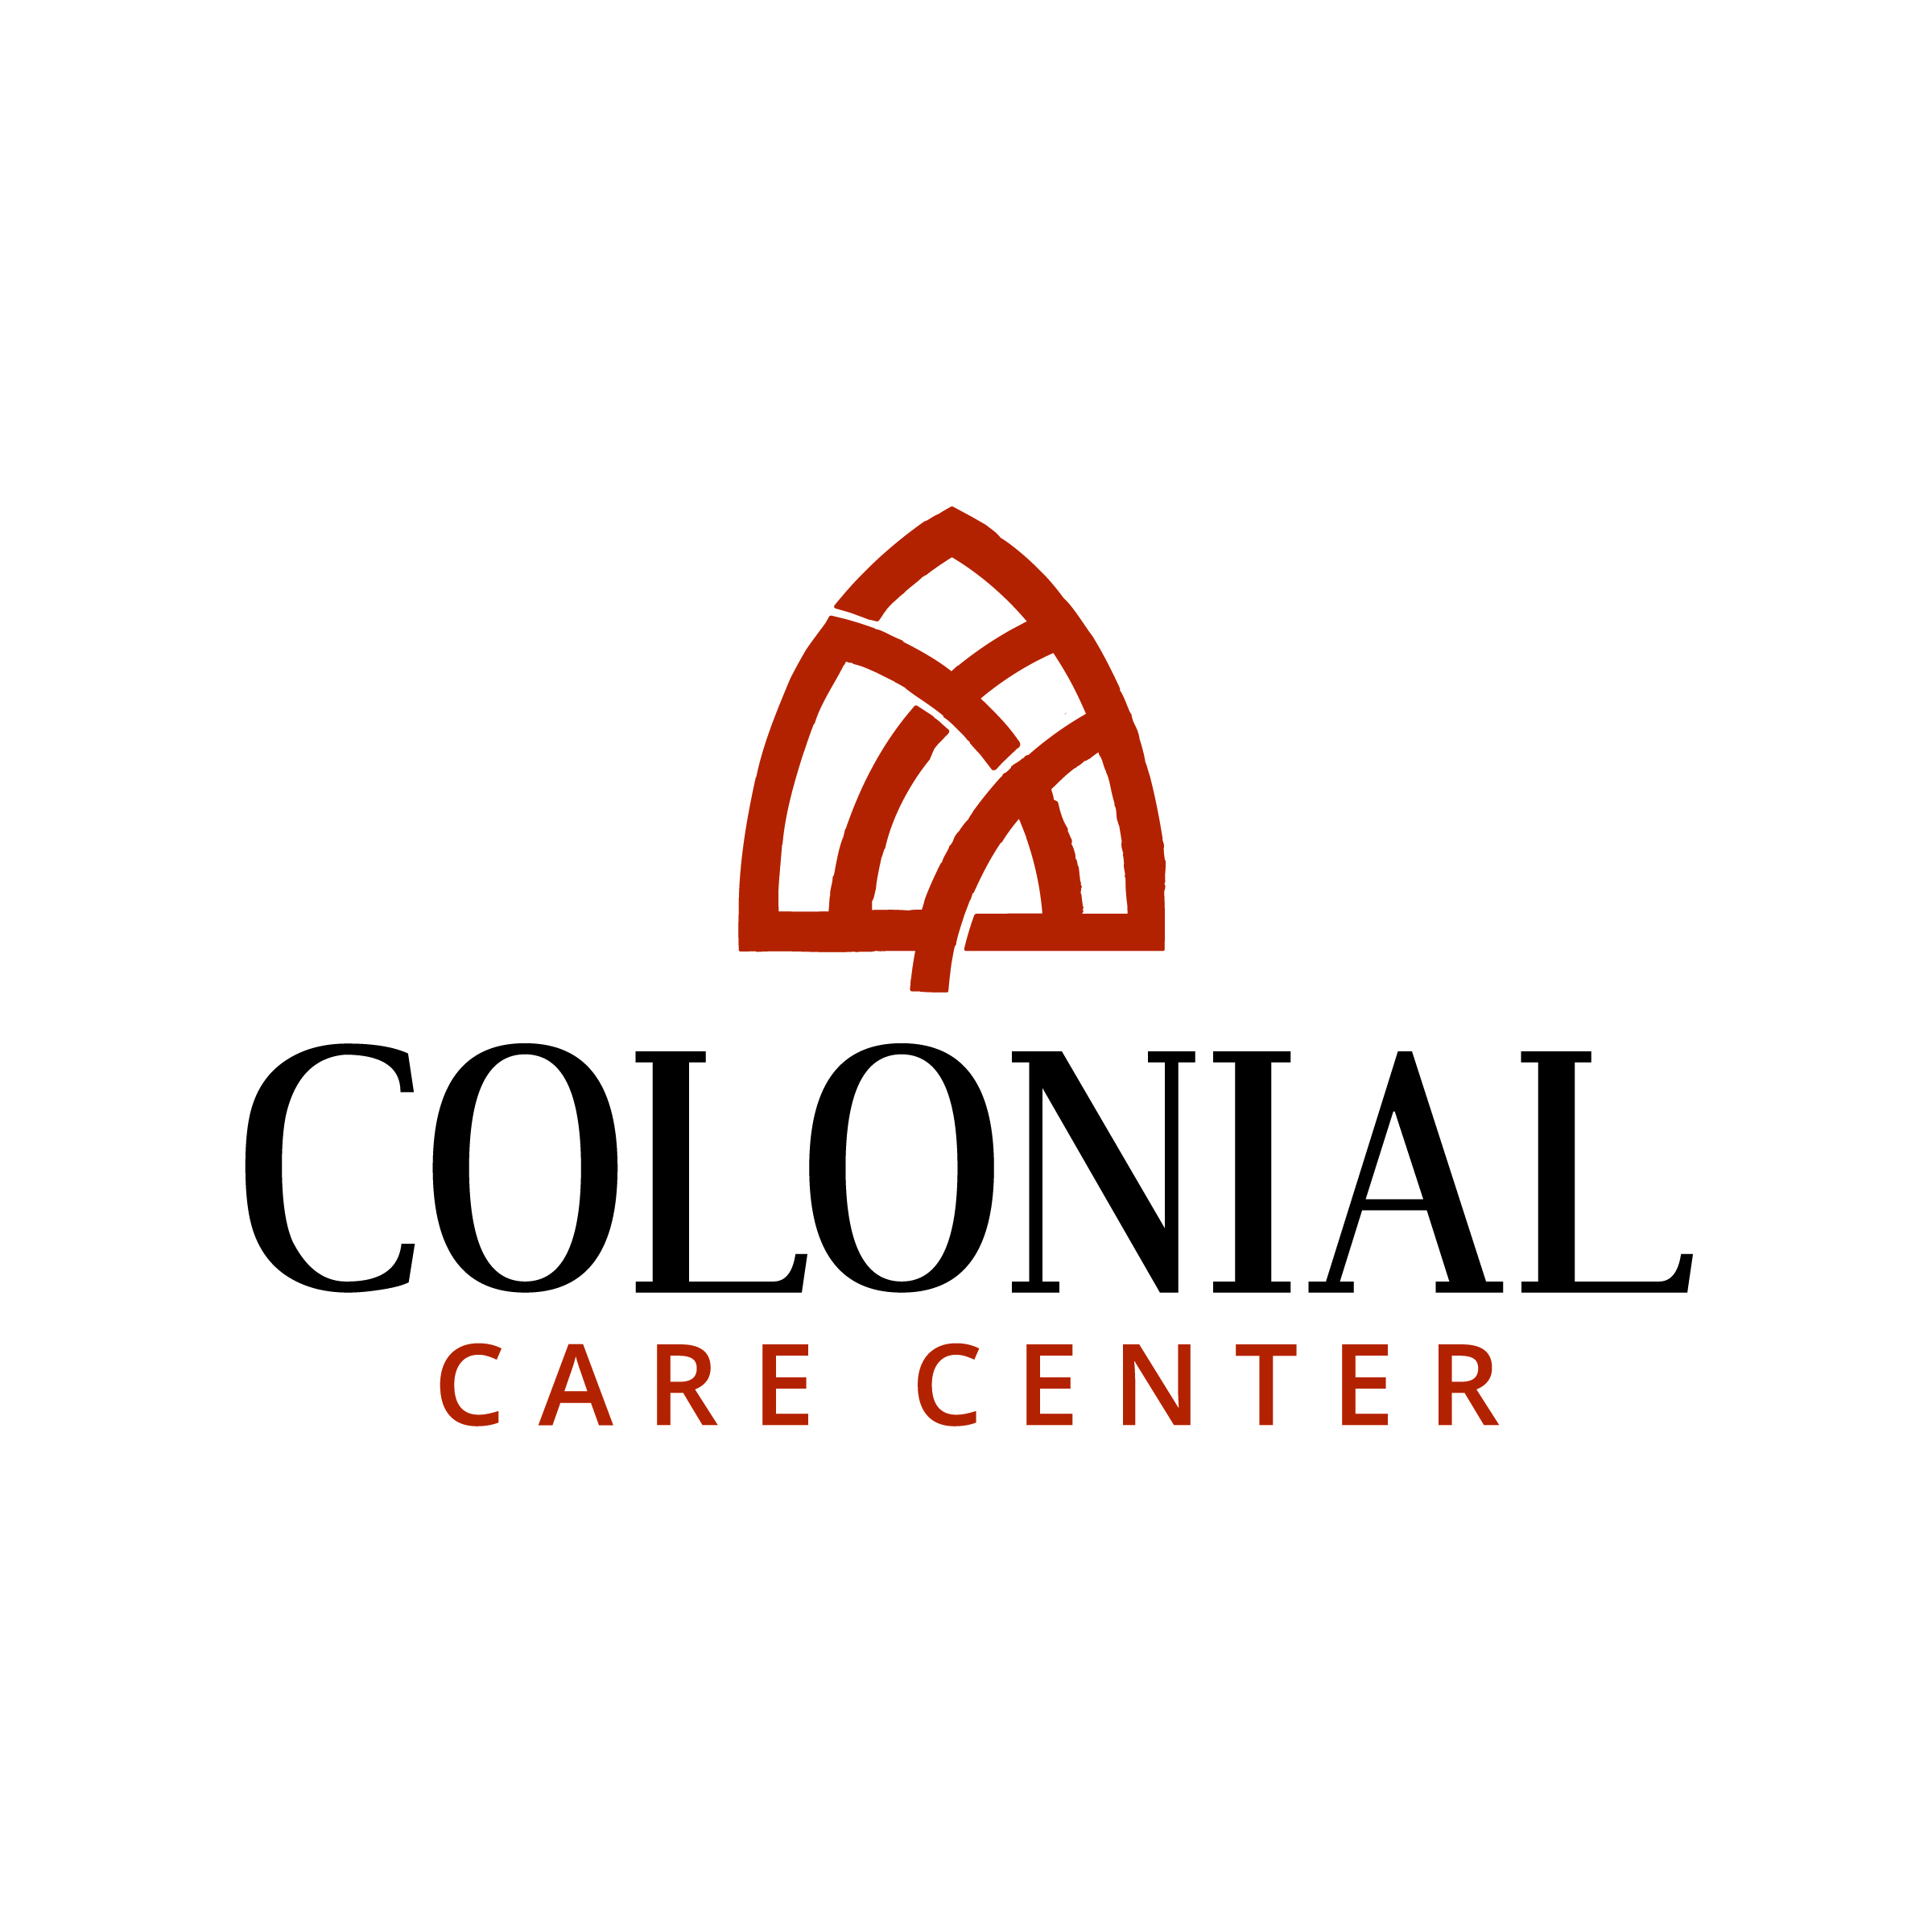 Colonial Care Center Announces New Ownership | Newswire